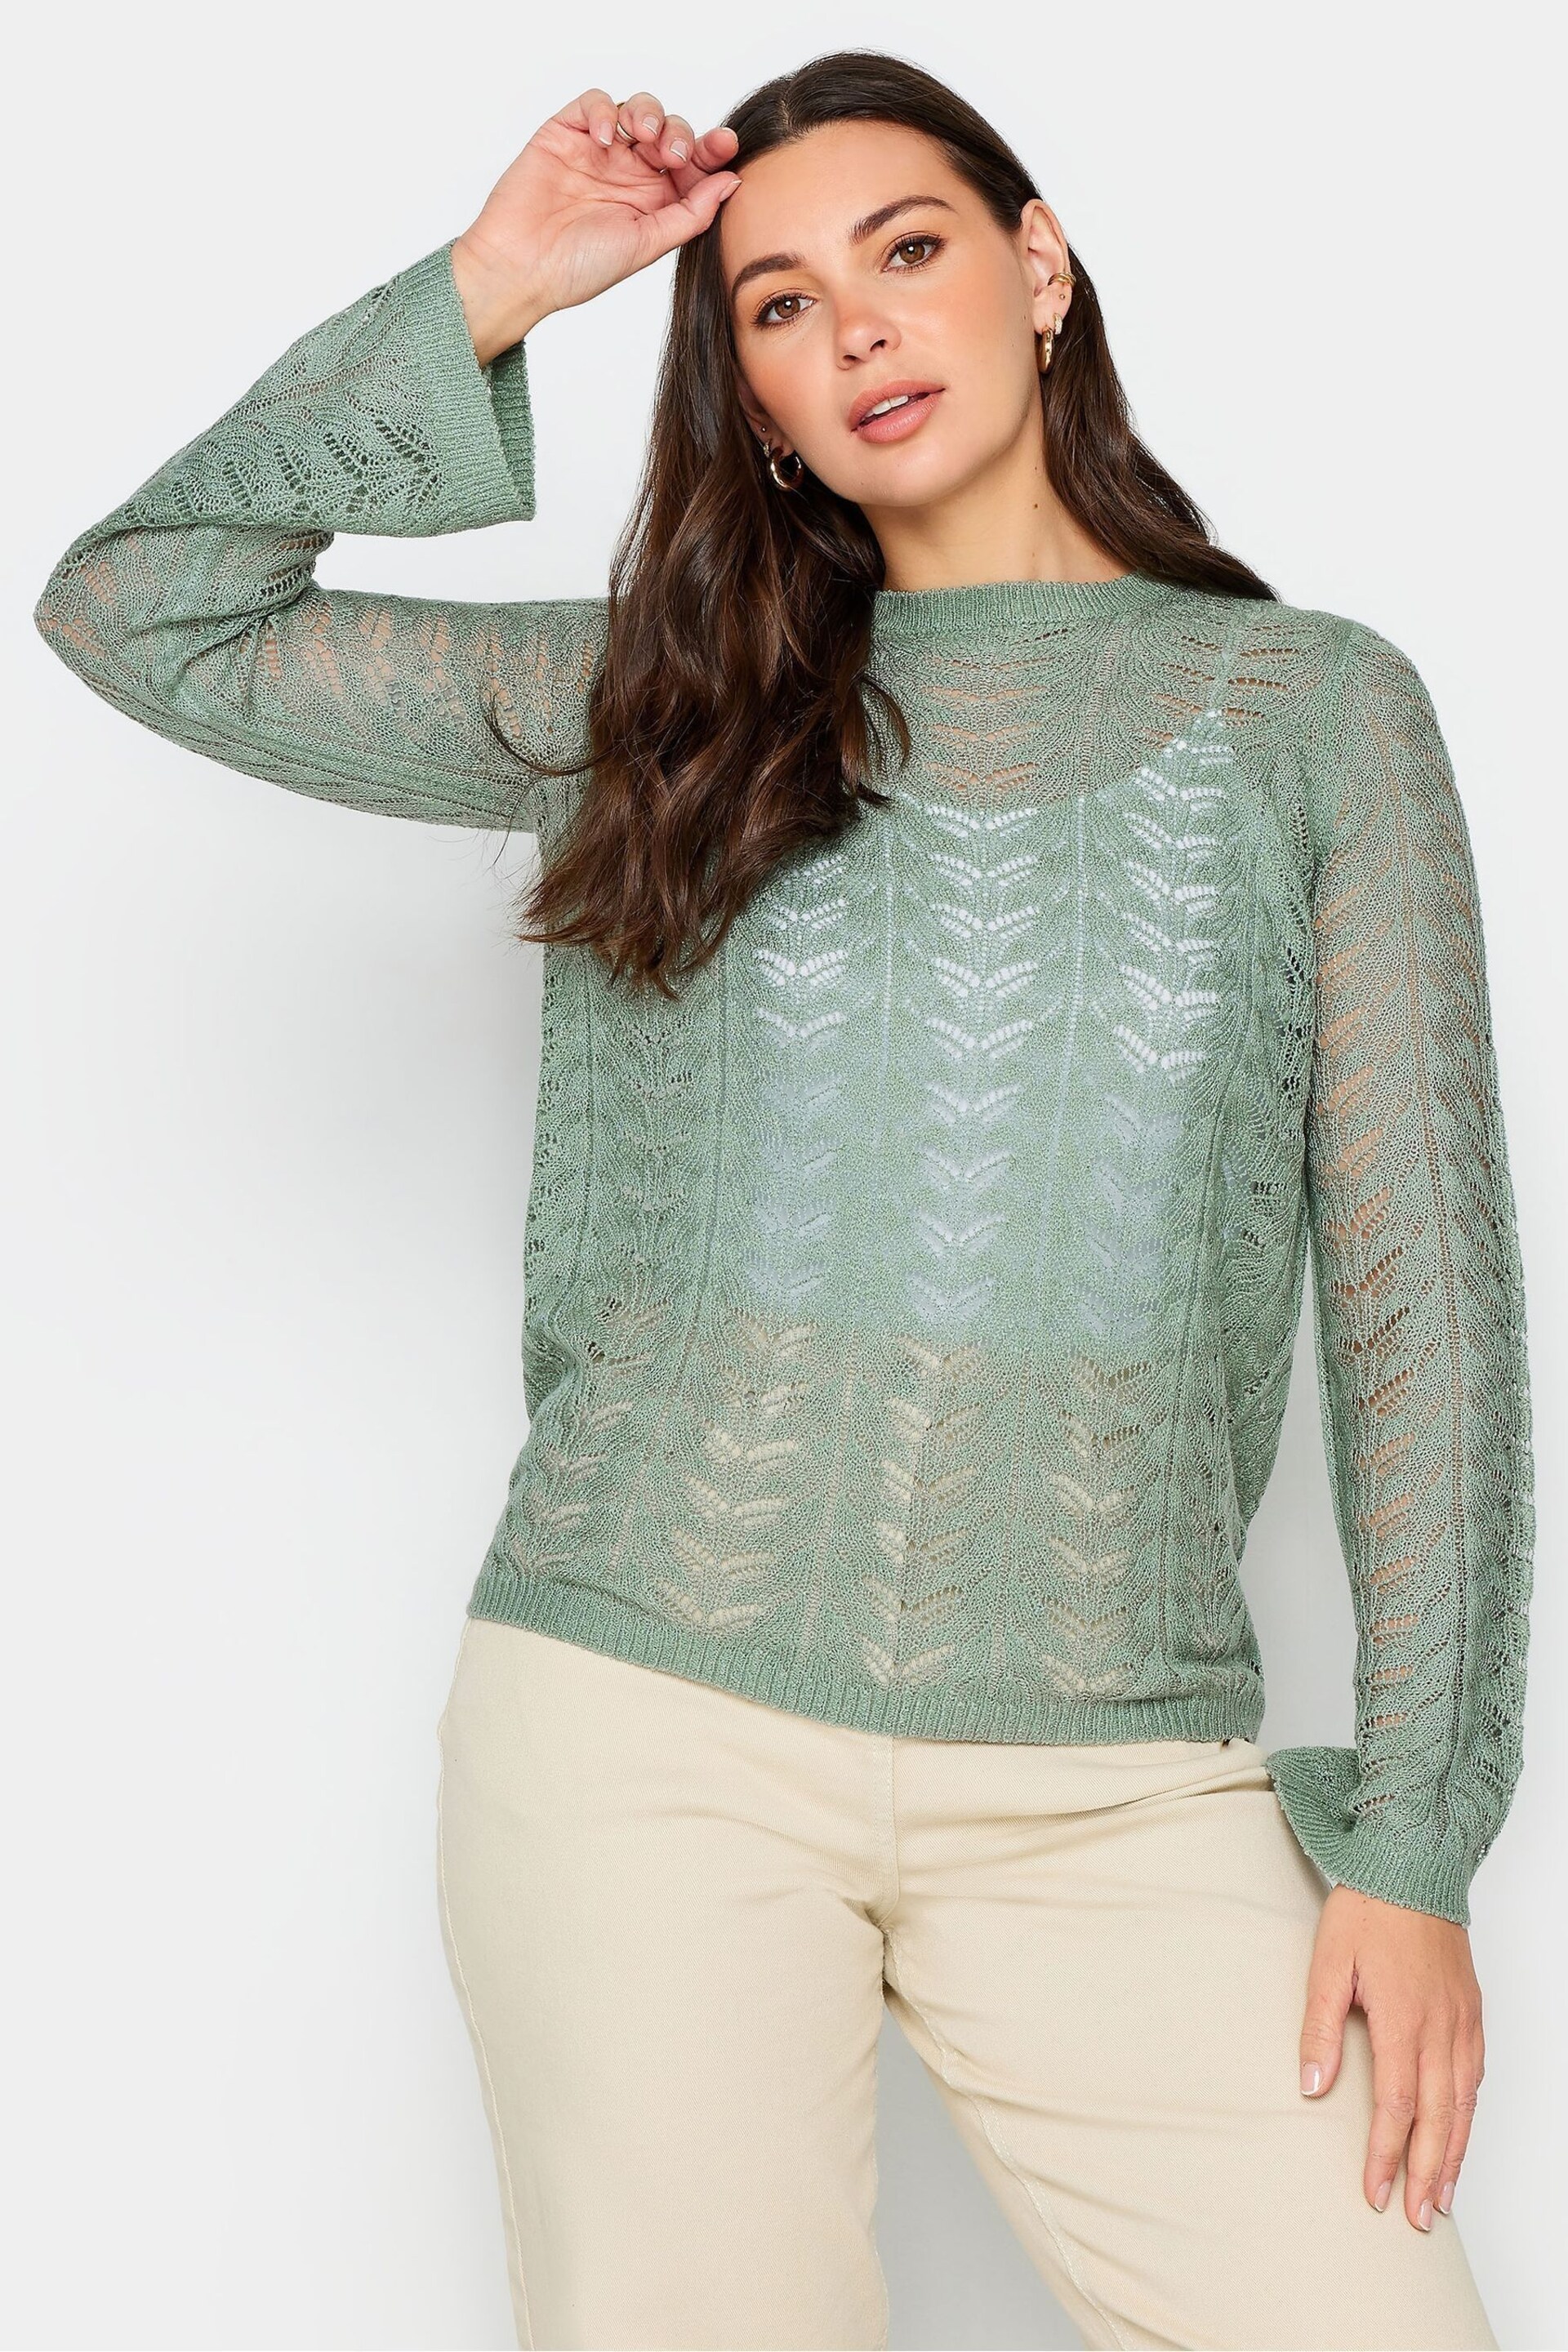 Long Tall Sally Green Pointelle Stitch Jumper - Image 1 of 4